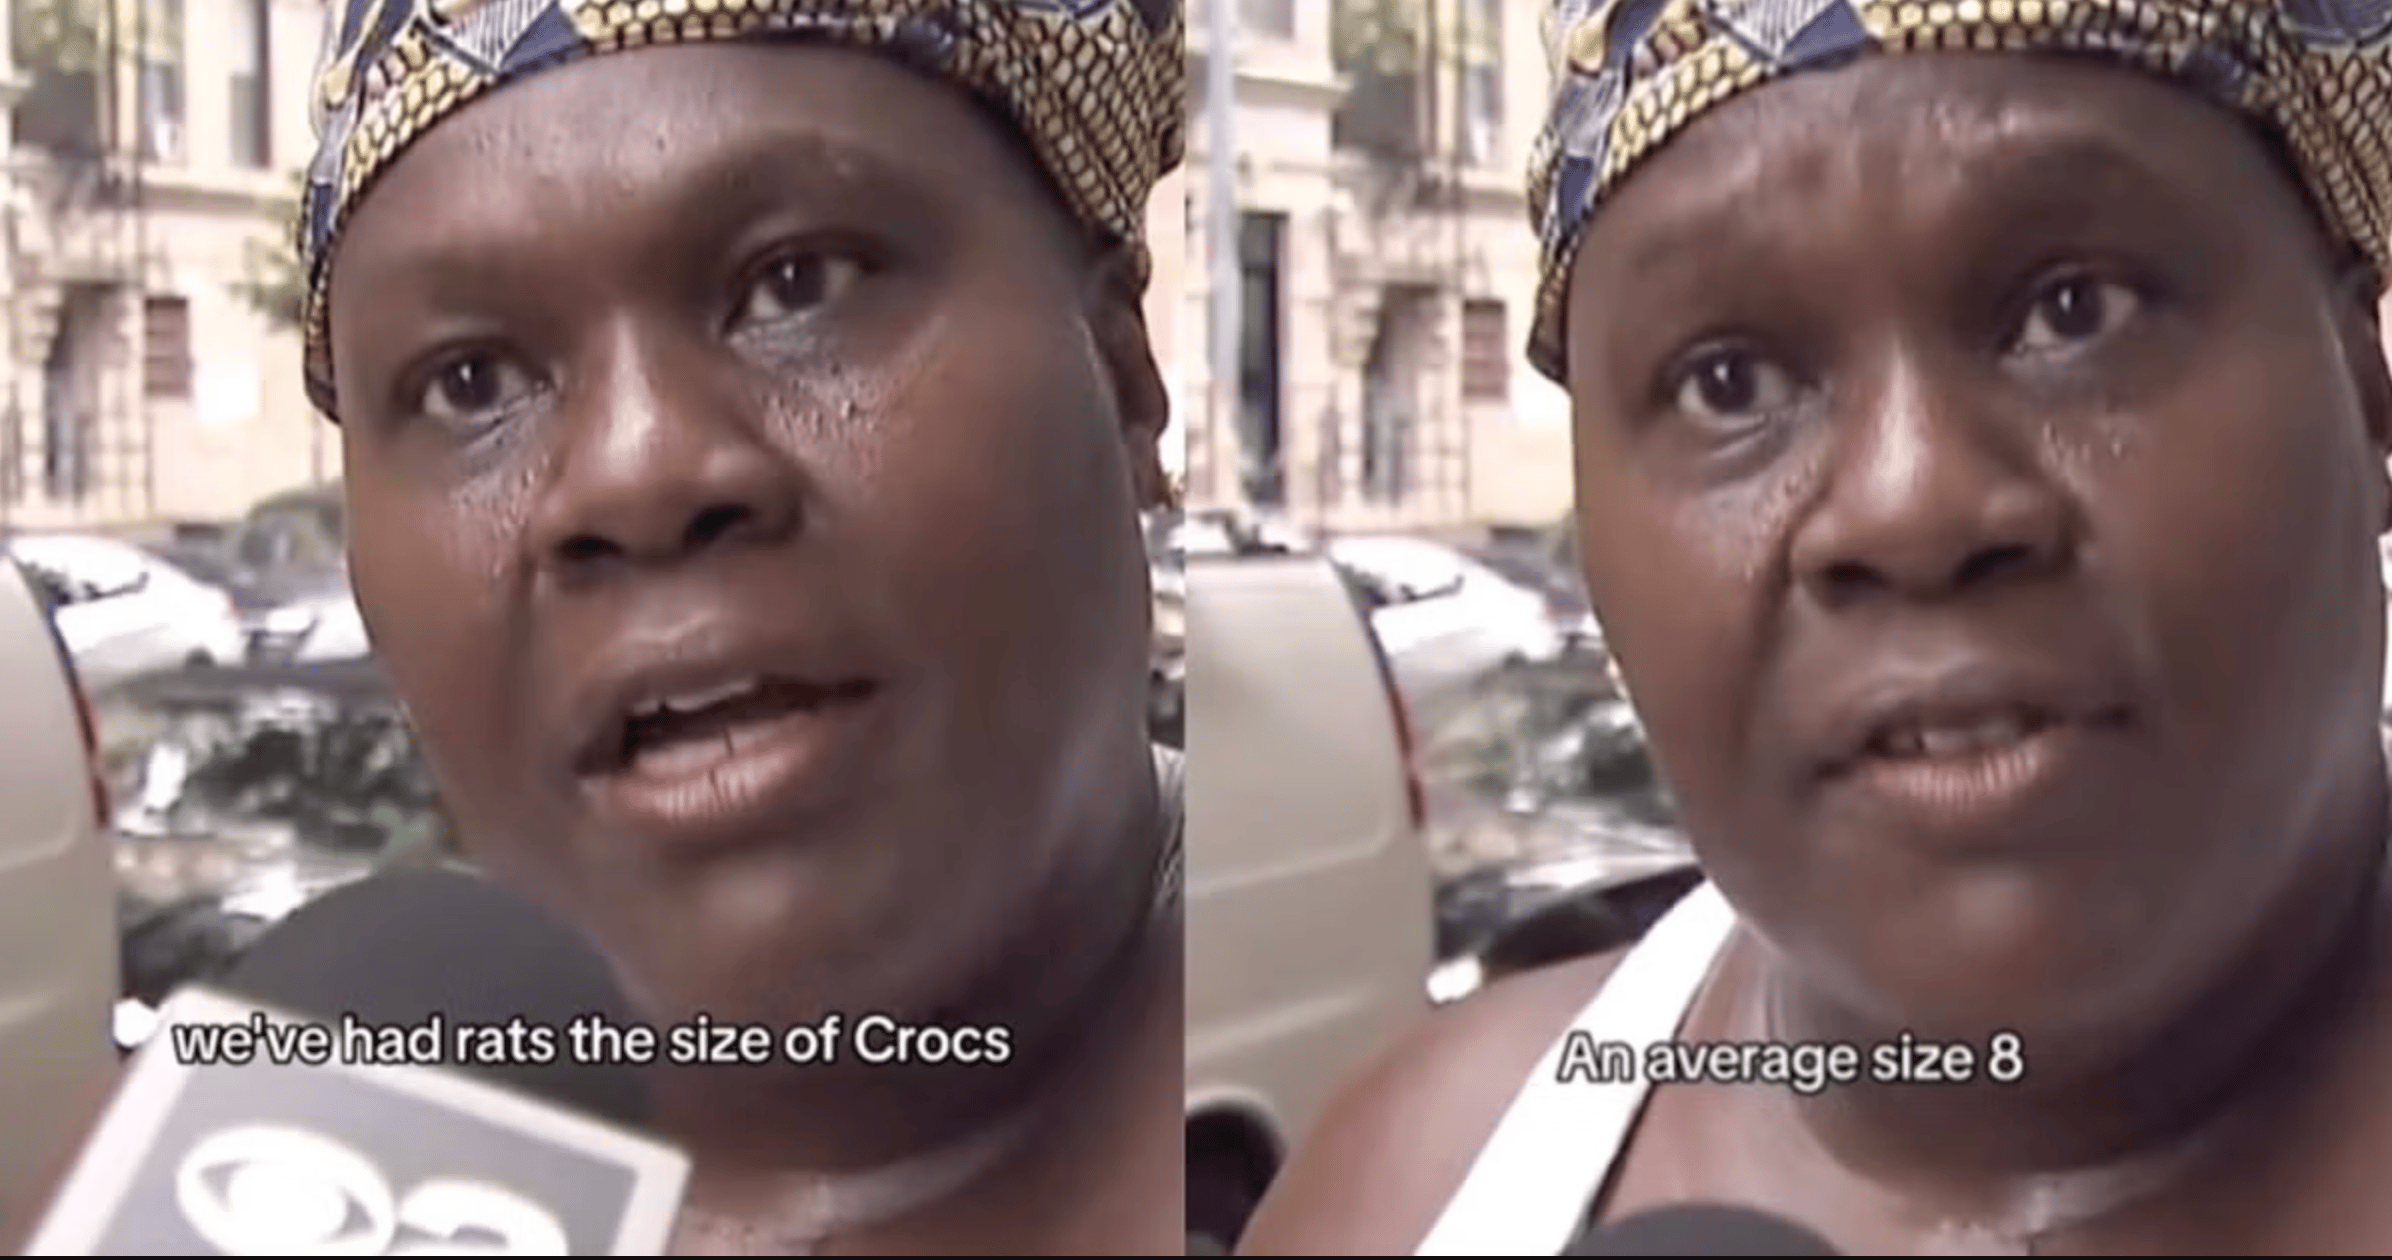 NYC Woman Tells News Anchor City Has ‘Rats The Size Of Size 8 Crocs’